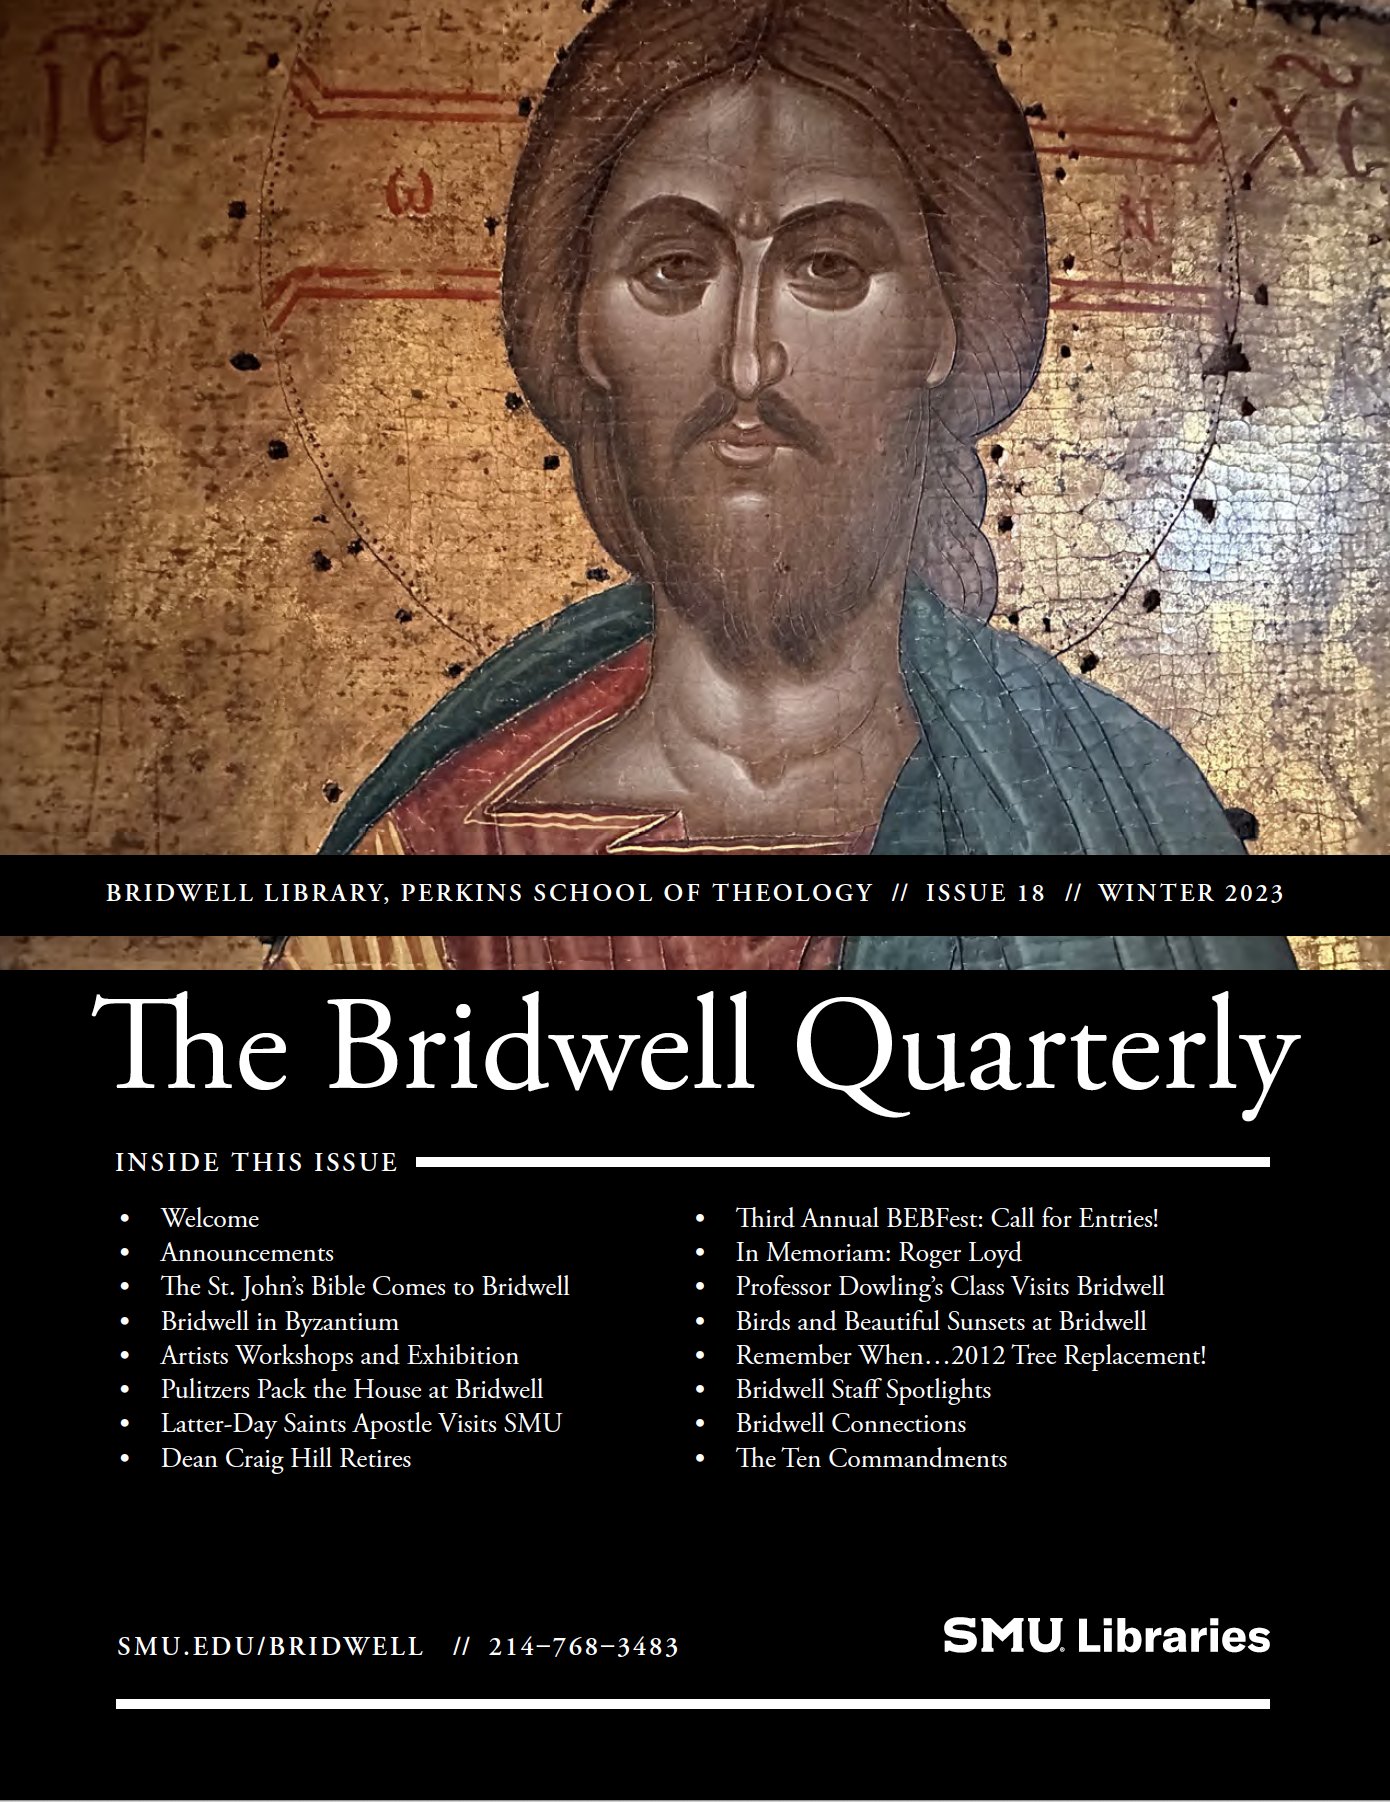 Forbidden New Testament · Heresy and Error: The Ecclesiastical Censorship  of Books, 1400–1800 · Bridwell Library Special Collections Exhibitions